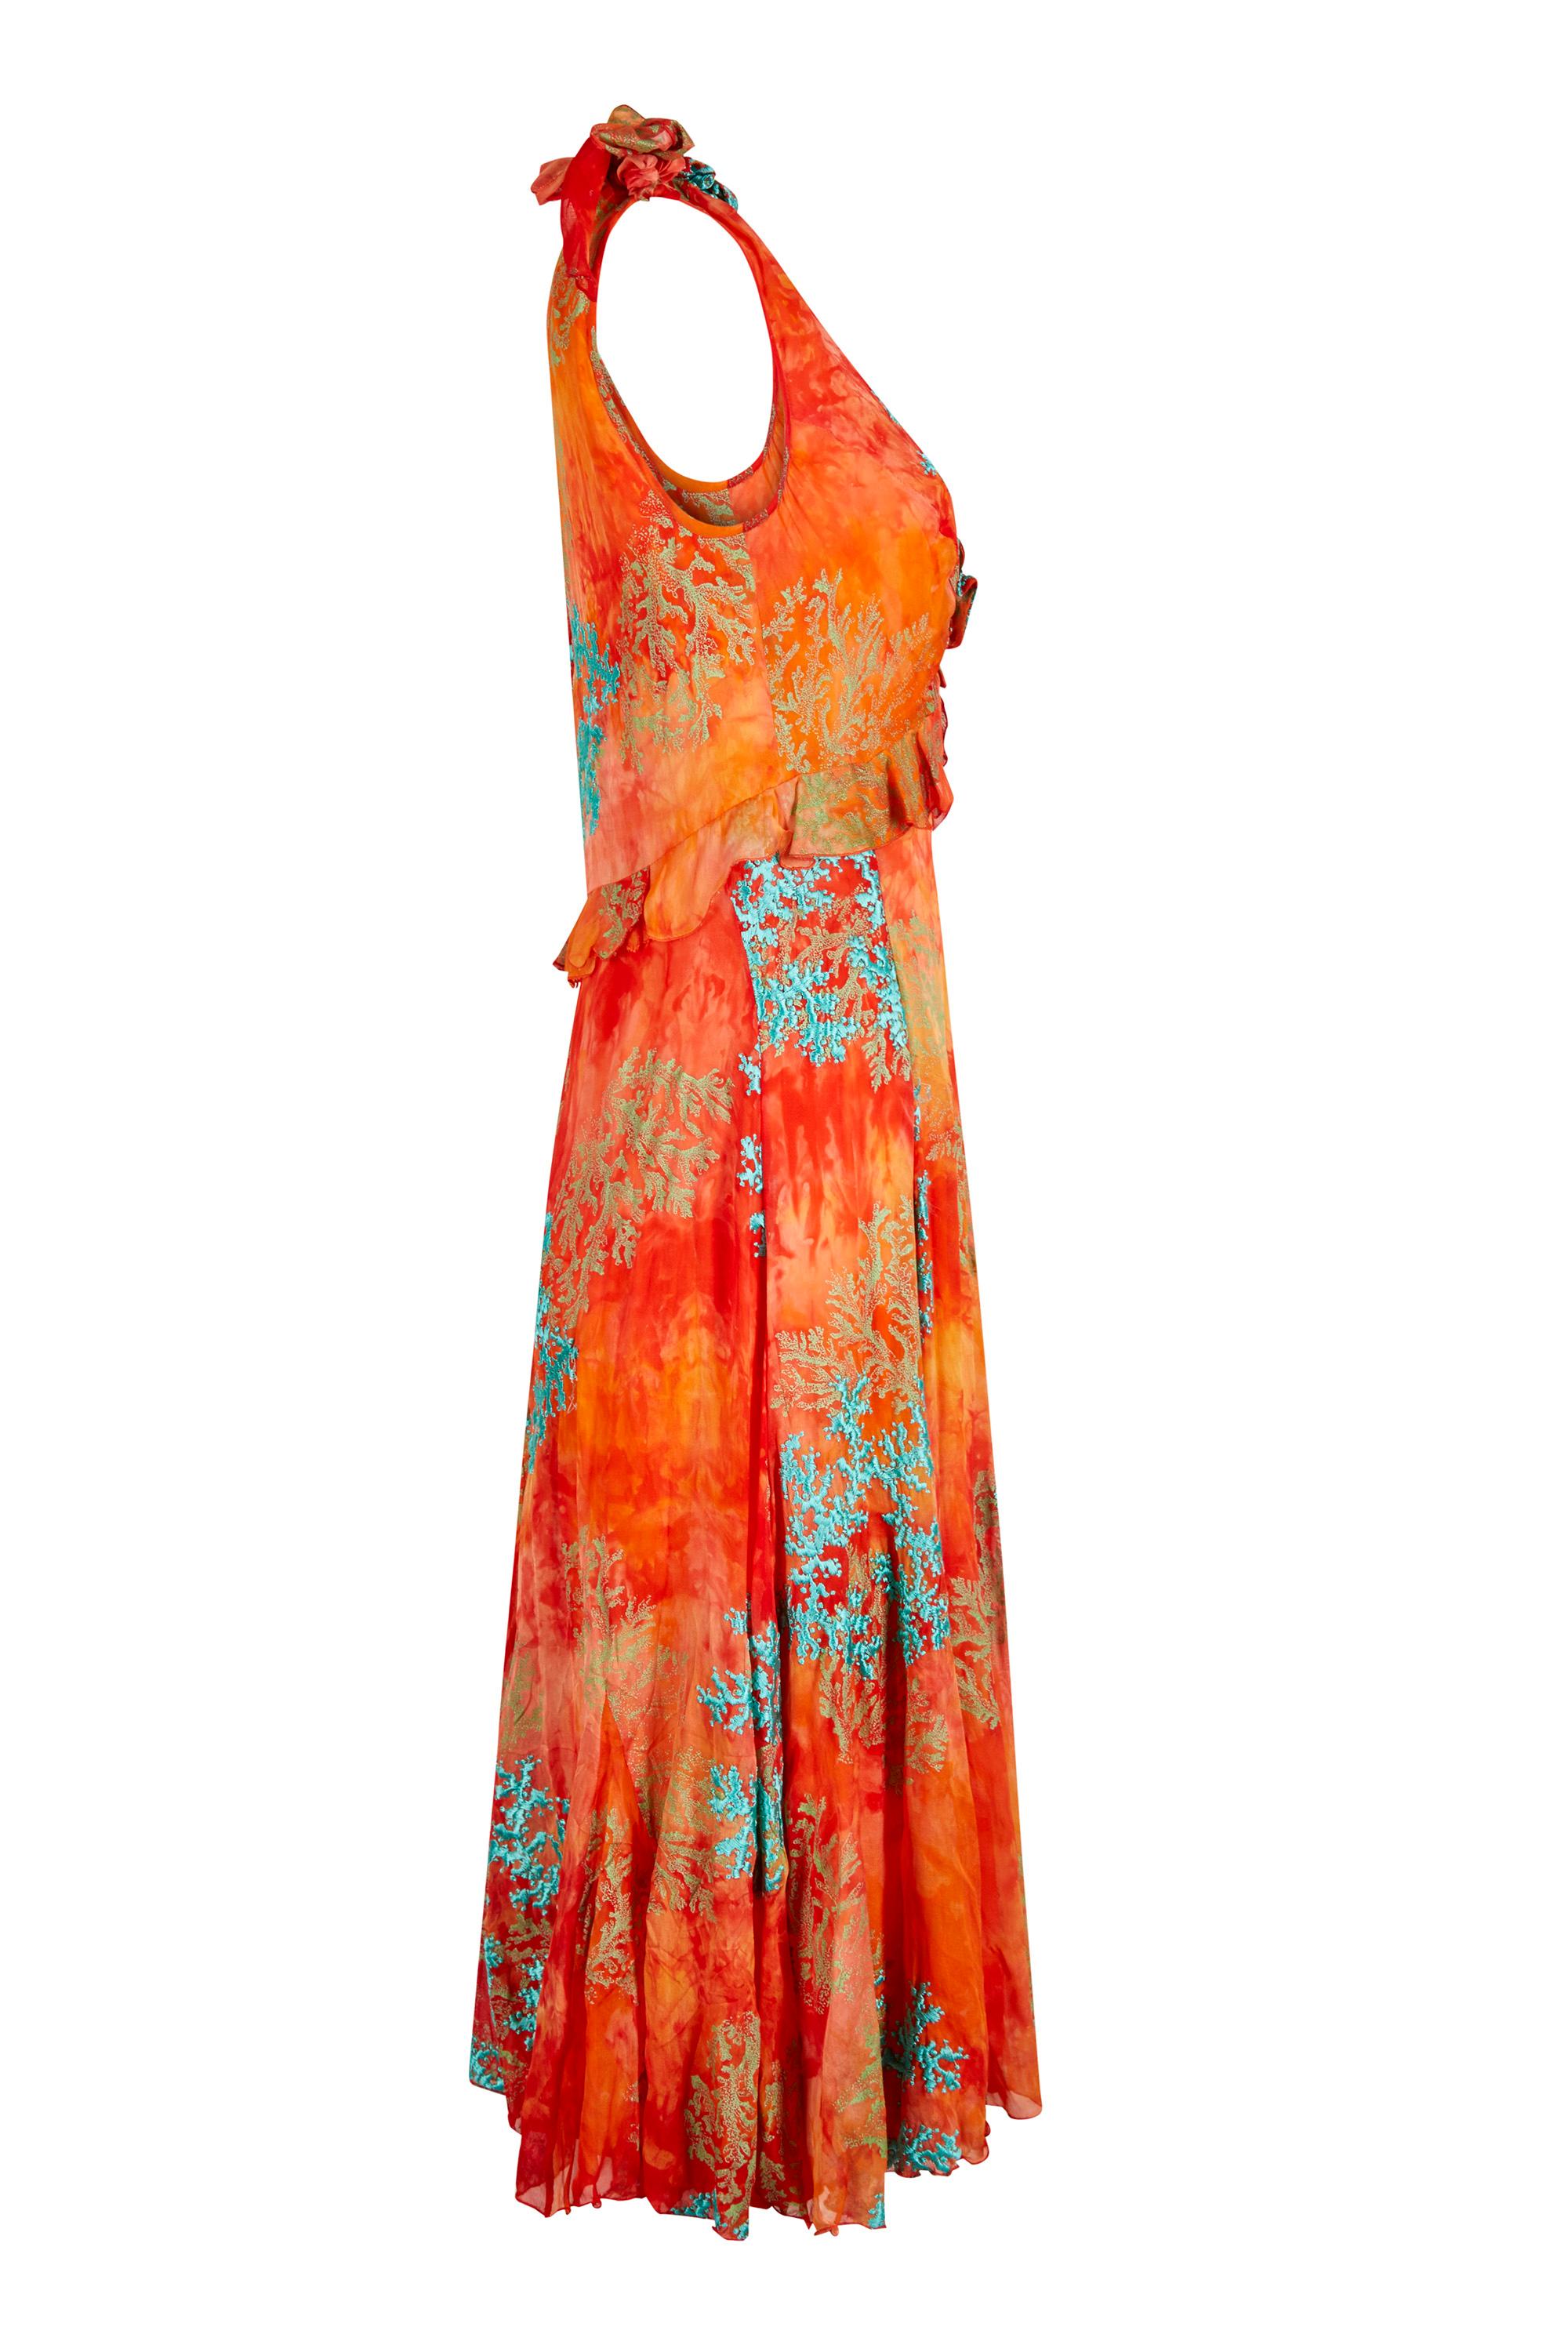 This sensational 1990s embroidered silk chiffon couture set is comprised of a dress and clutch bag in matching fabric. The fabric is a vibrant tangerine which has been tie dyed to create a textured effect in a slightly lighter shade. It has then